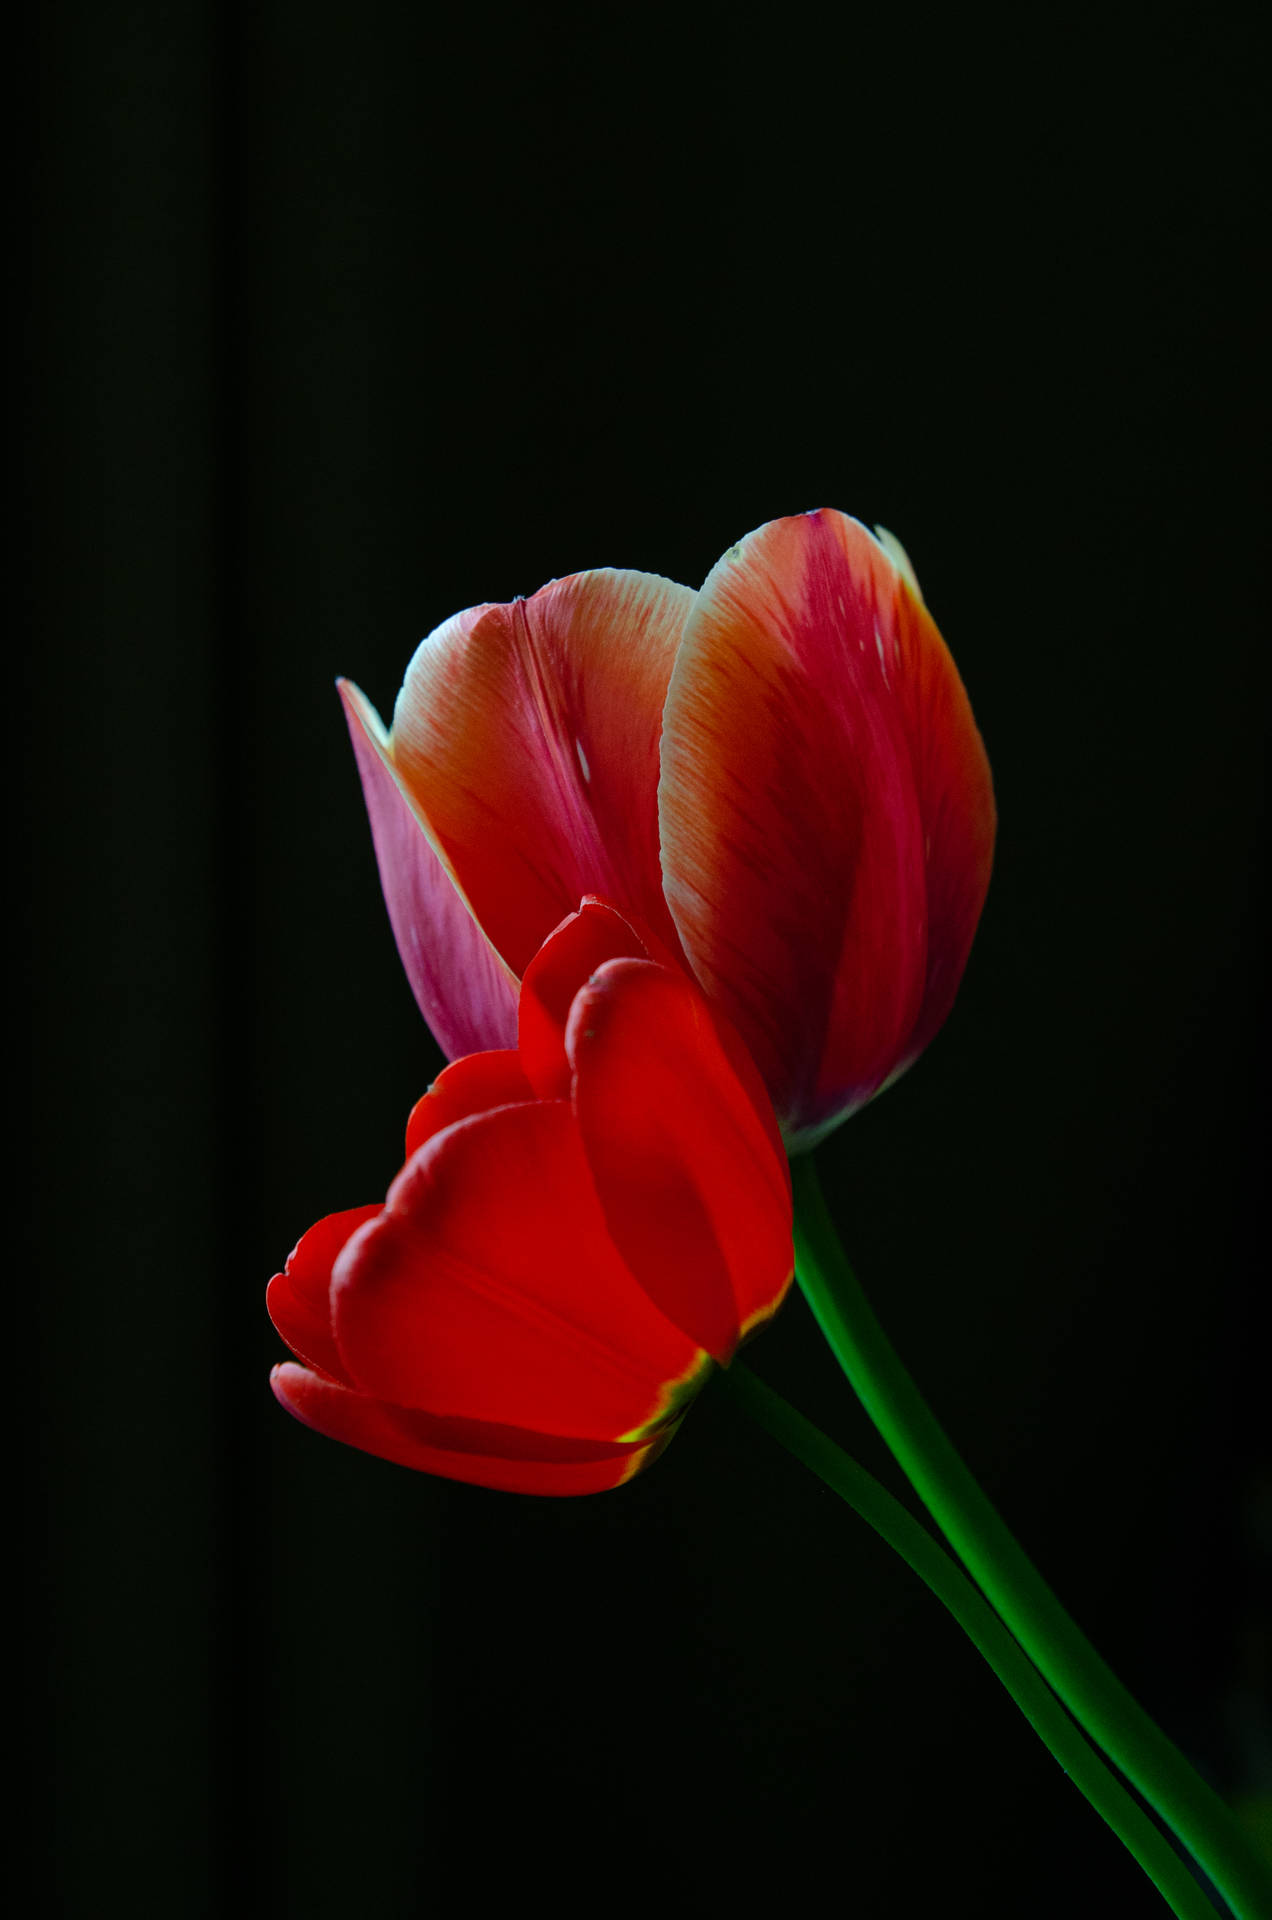 Dark And Bloody Red Tulips Wallpaper